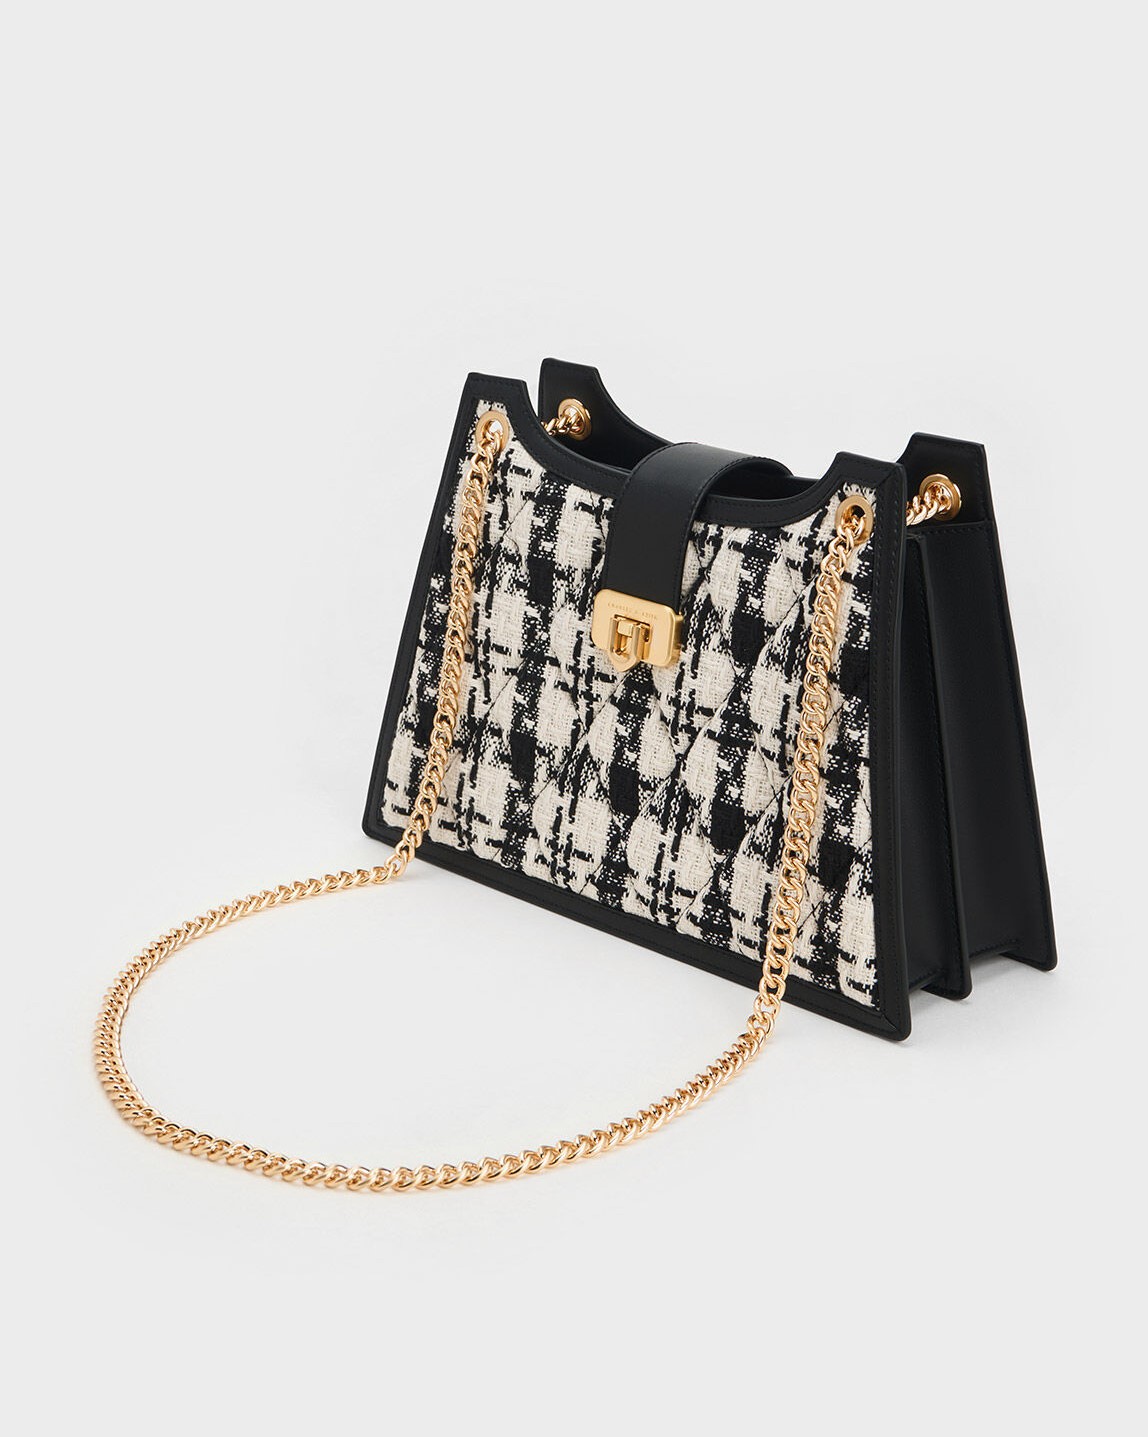 TÚI ĐEO CHÉO CNK CHARLES KEITH CRESSIDA QUILTED TRAPEZE CHAIN BAG CK2-30151307 4